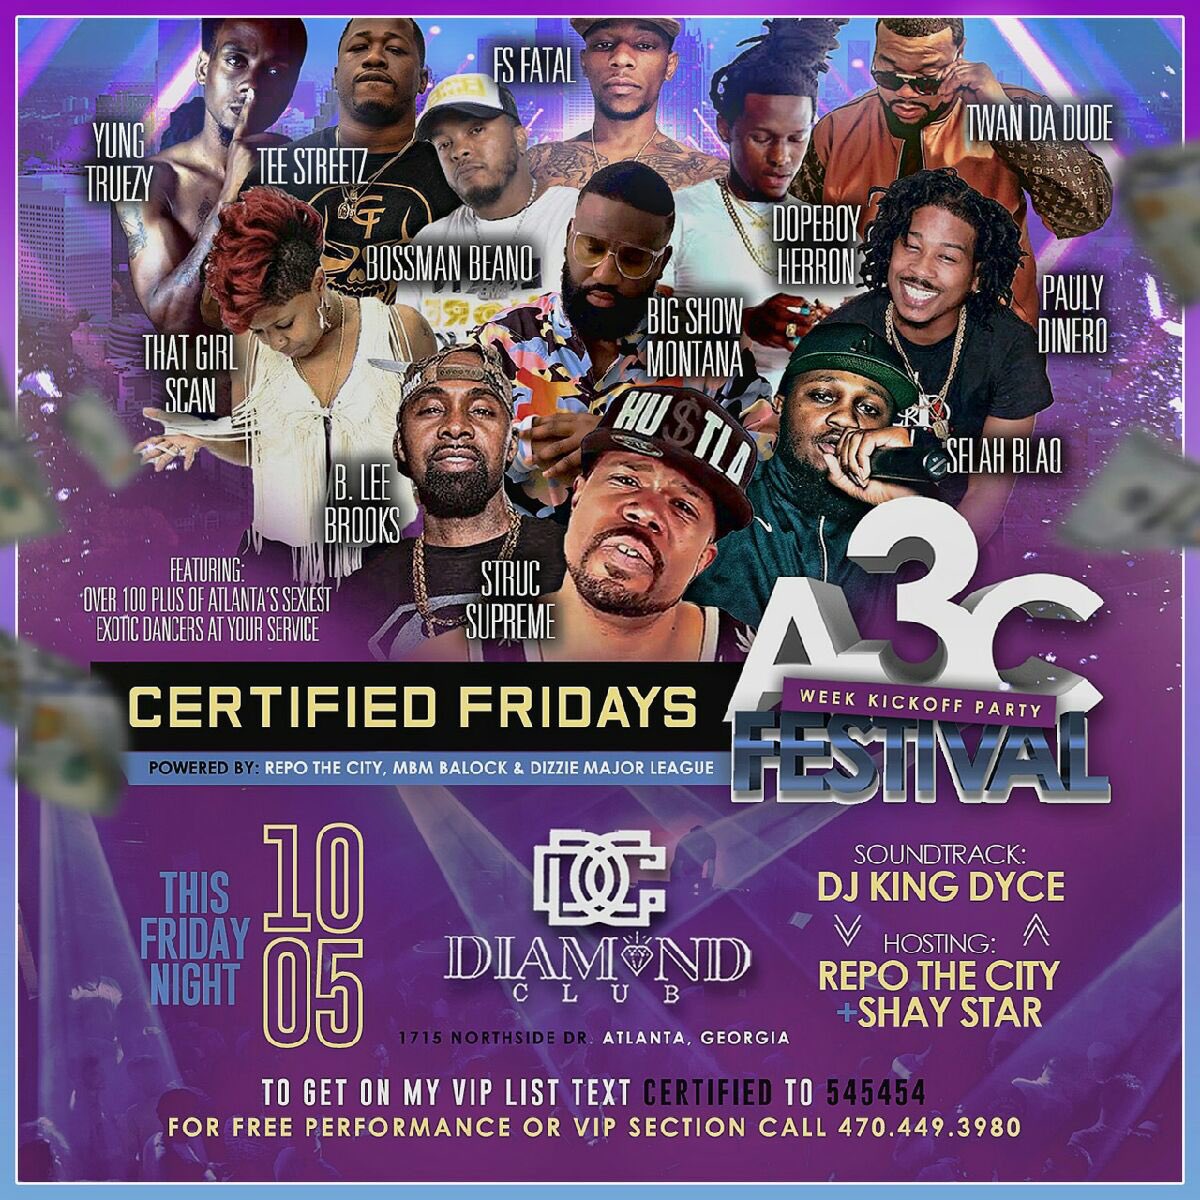 ANOTHER ☝🏾🔥
I’m tearin A3C up!!
4 performances and counting! 🤦🏾‍♂️🤮
#Selah #A3C #Atlanta #IndependentGrind #RespekMyGrind #PoetryinHipHop